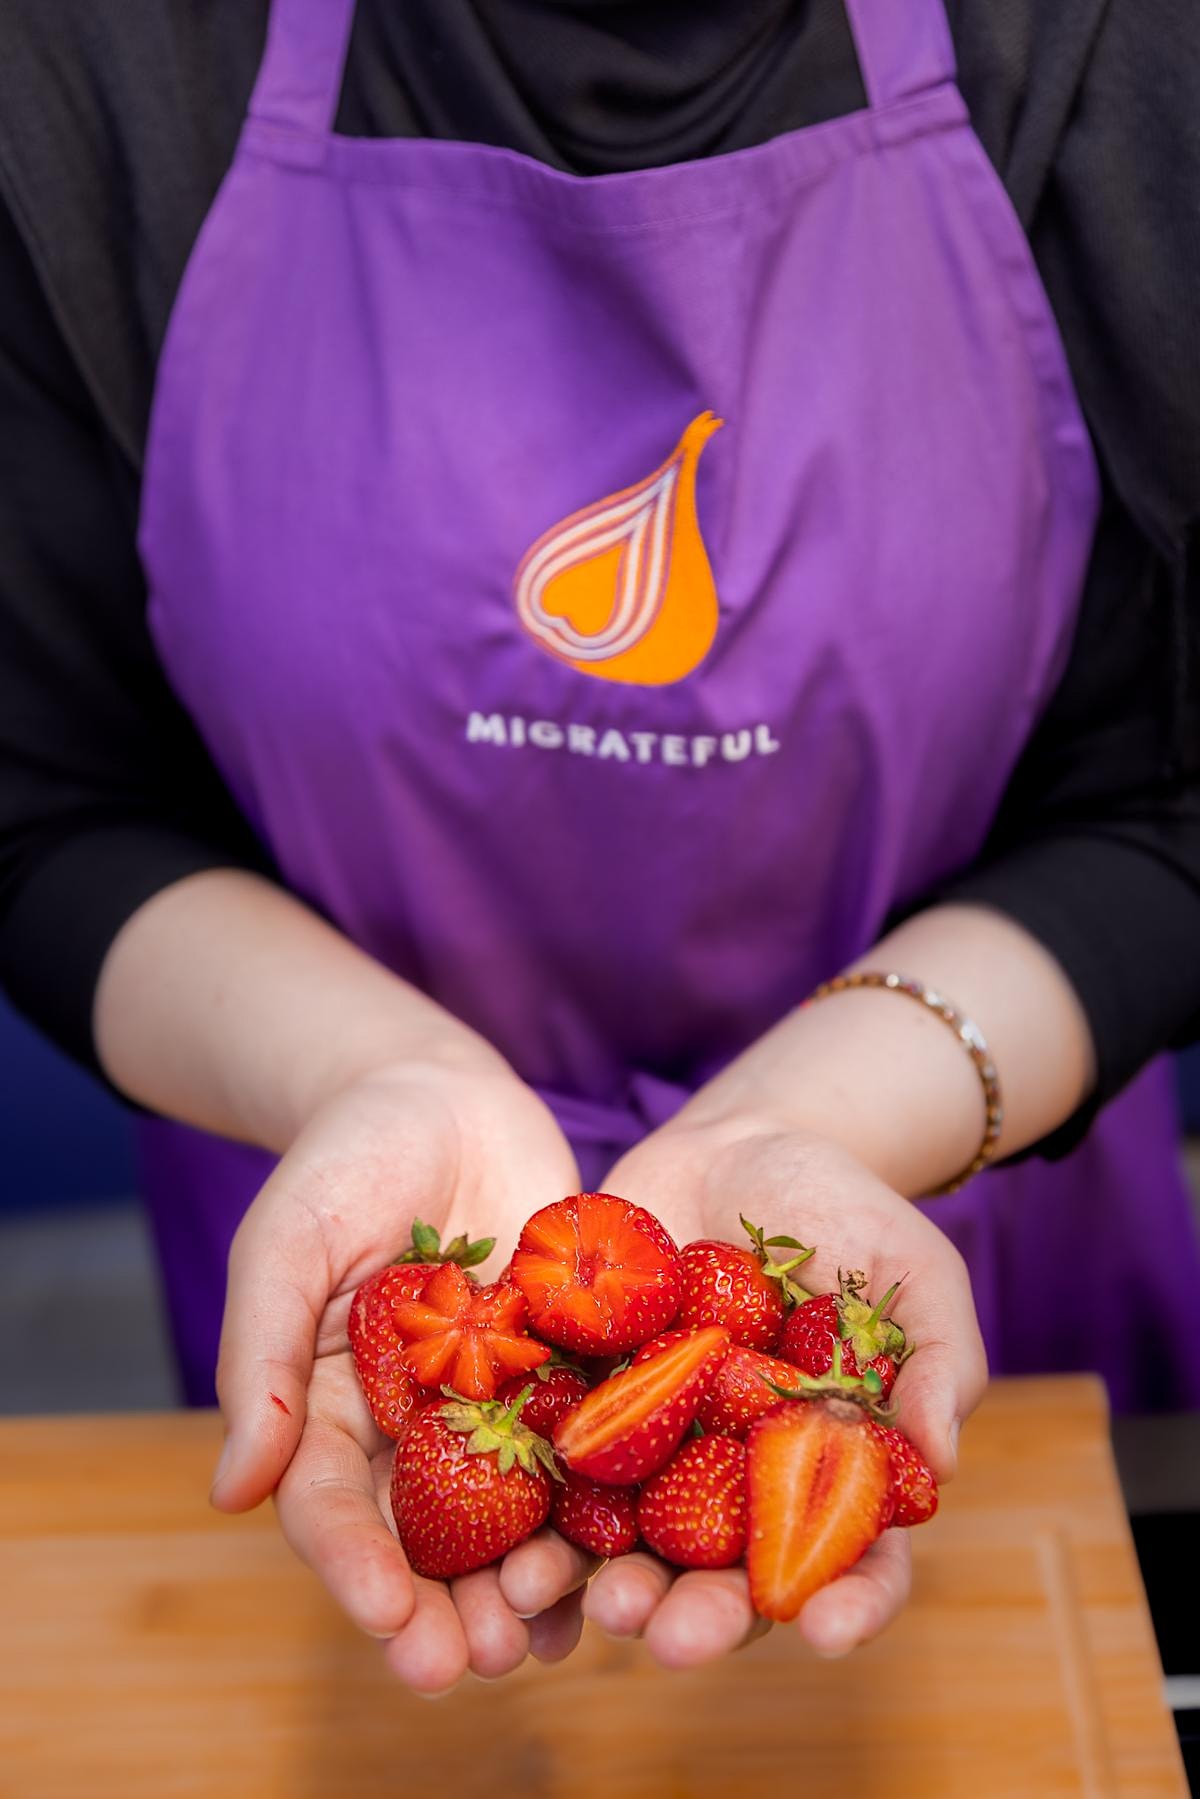 A woman participating in a London Cookery Class, holding strawberries, wearing a purple apron.